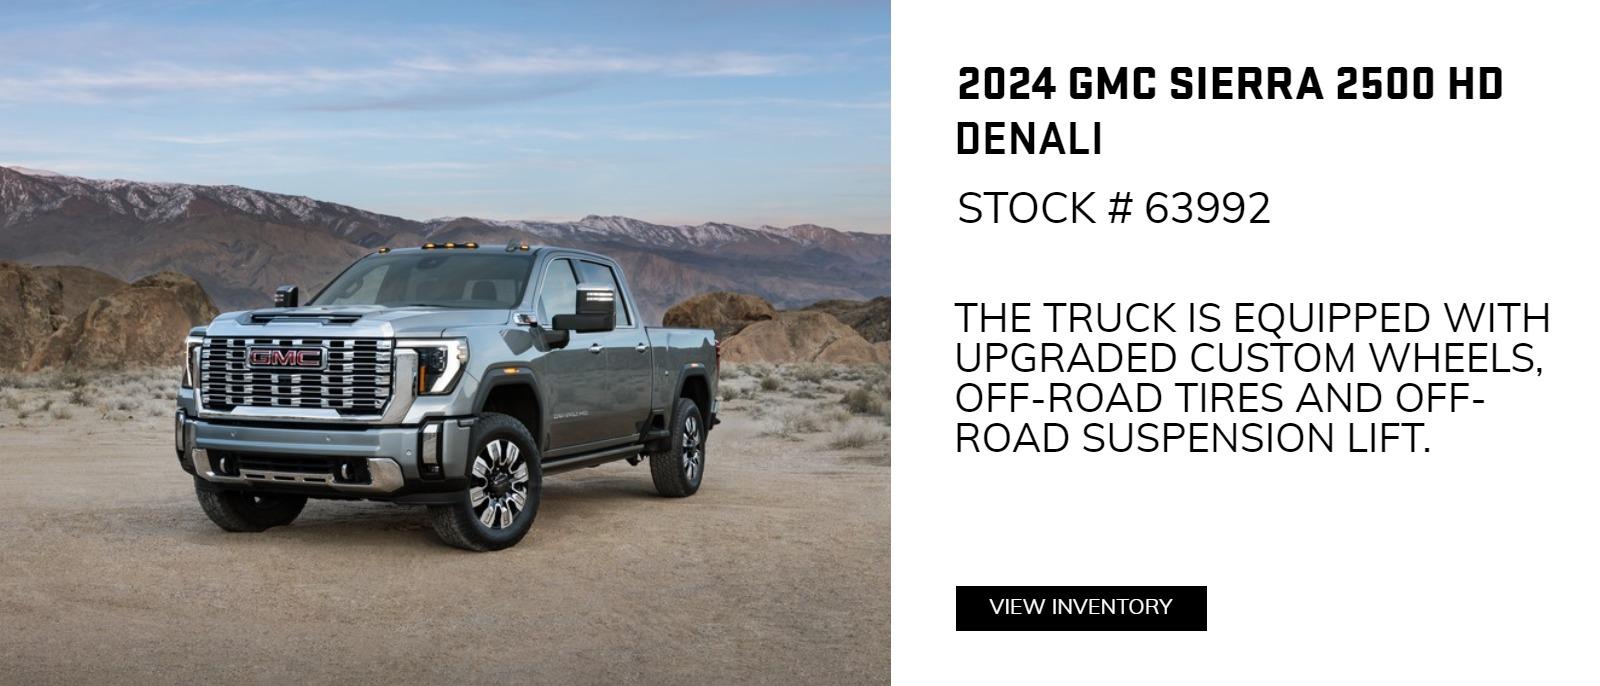 2024 GMC Sierra 2500HD Denali Stk # 63992
THE TRUCK IS EQUIPPED WITH UPGRADED CUSTOM WHEELS,
OFF-ROAD TIRES AND OFF-ROAD SUSPENSION LIFT.